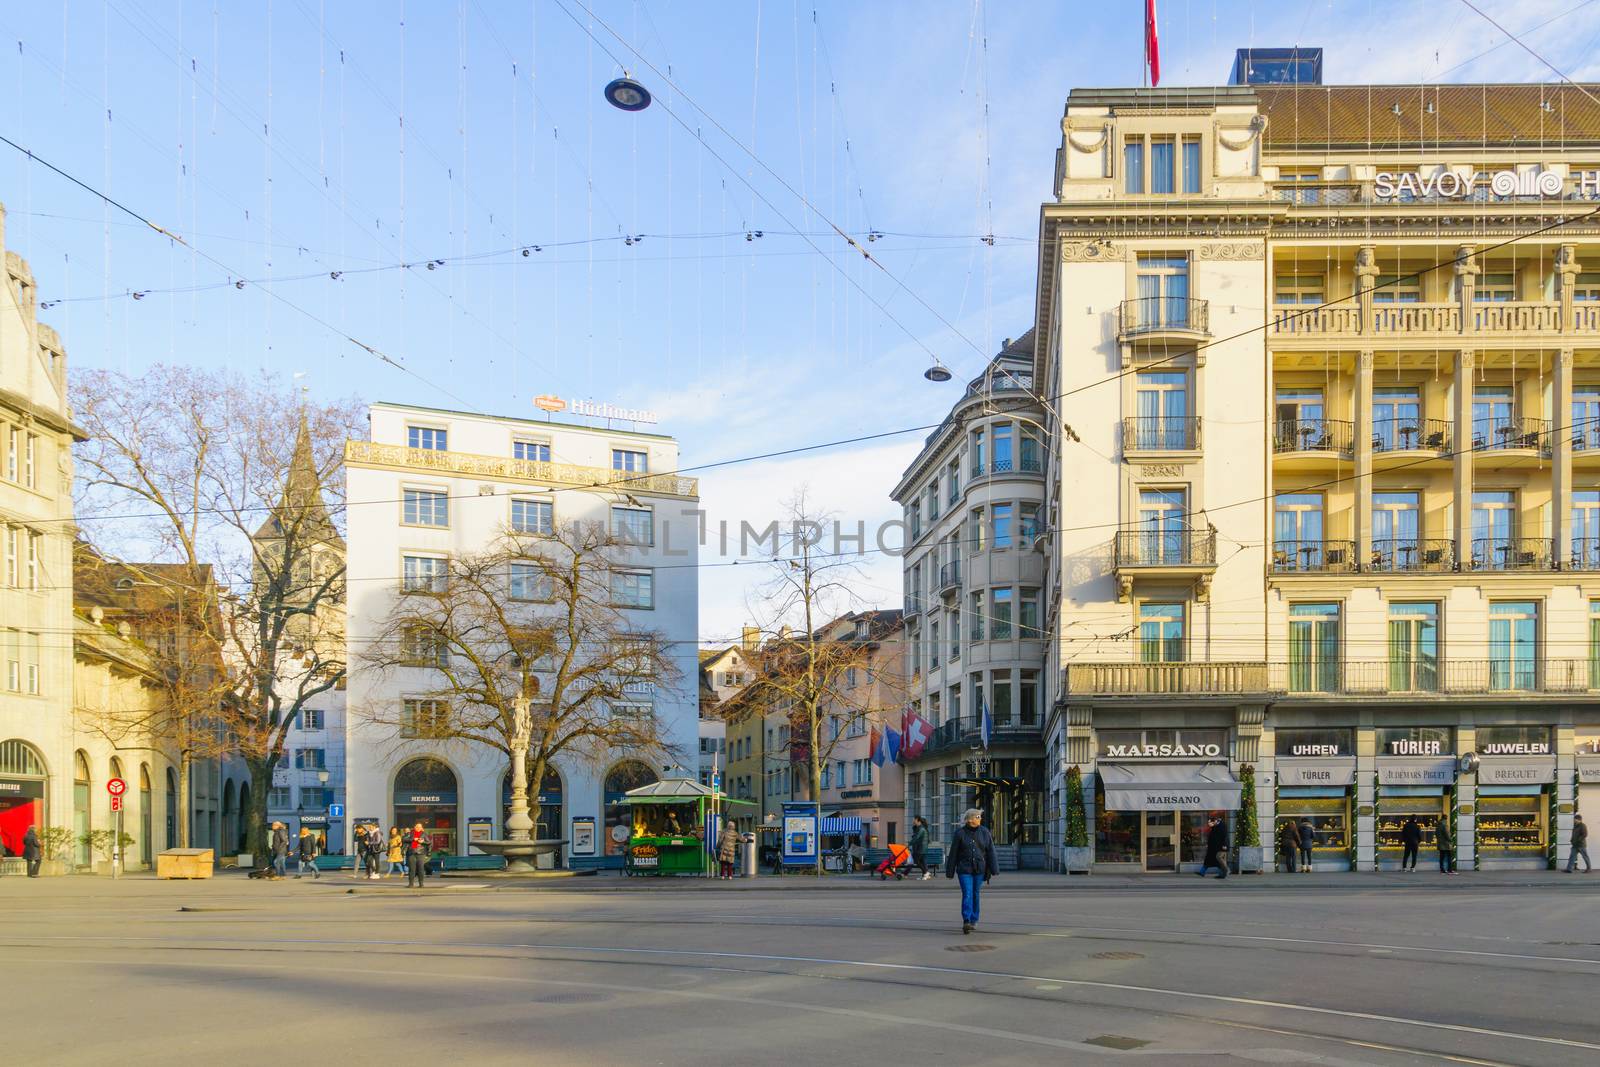 Paradeplatz (Parade) square, in Zurich by RnDmS